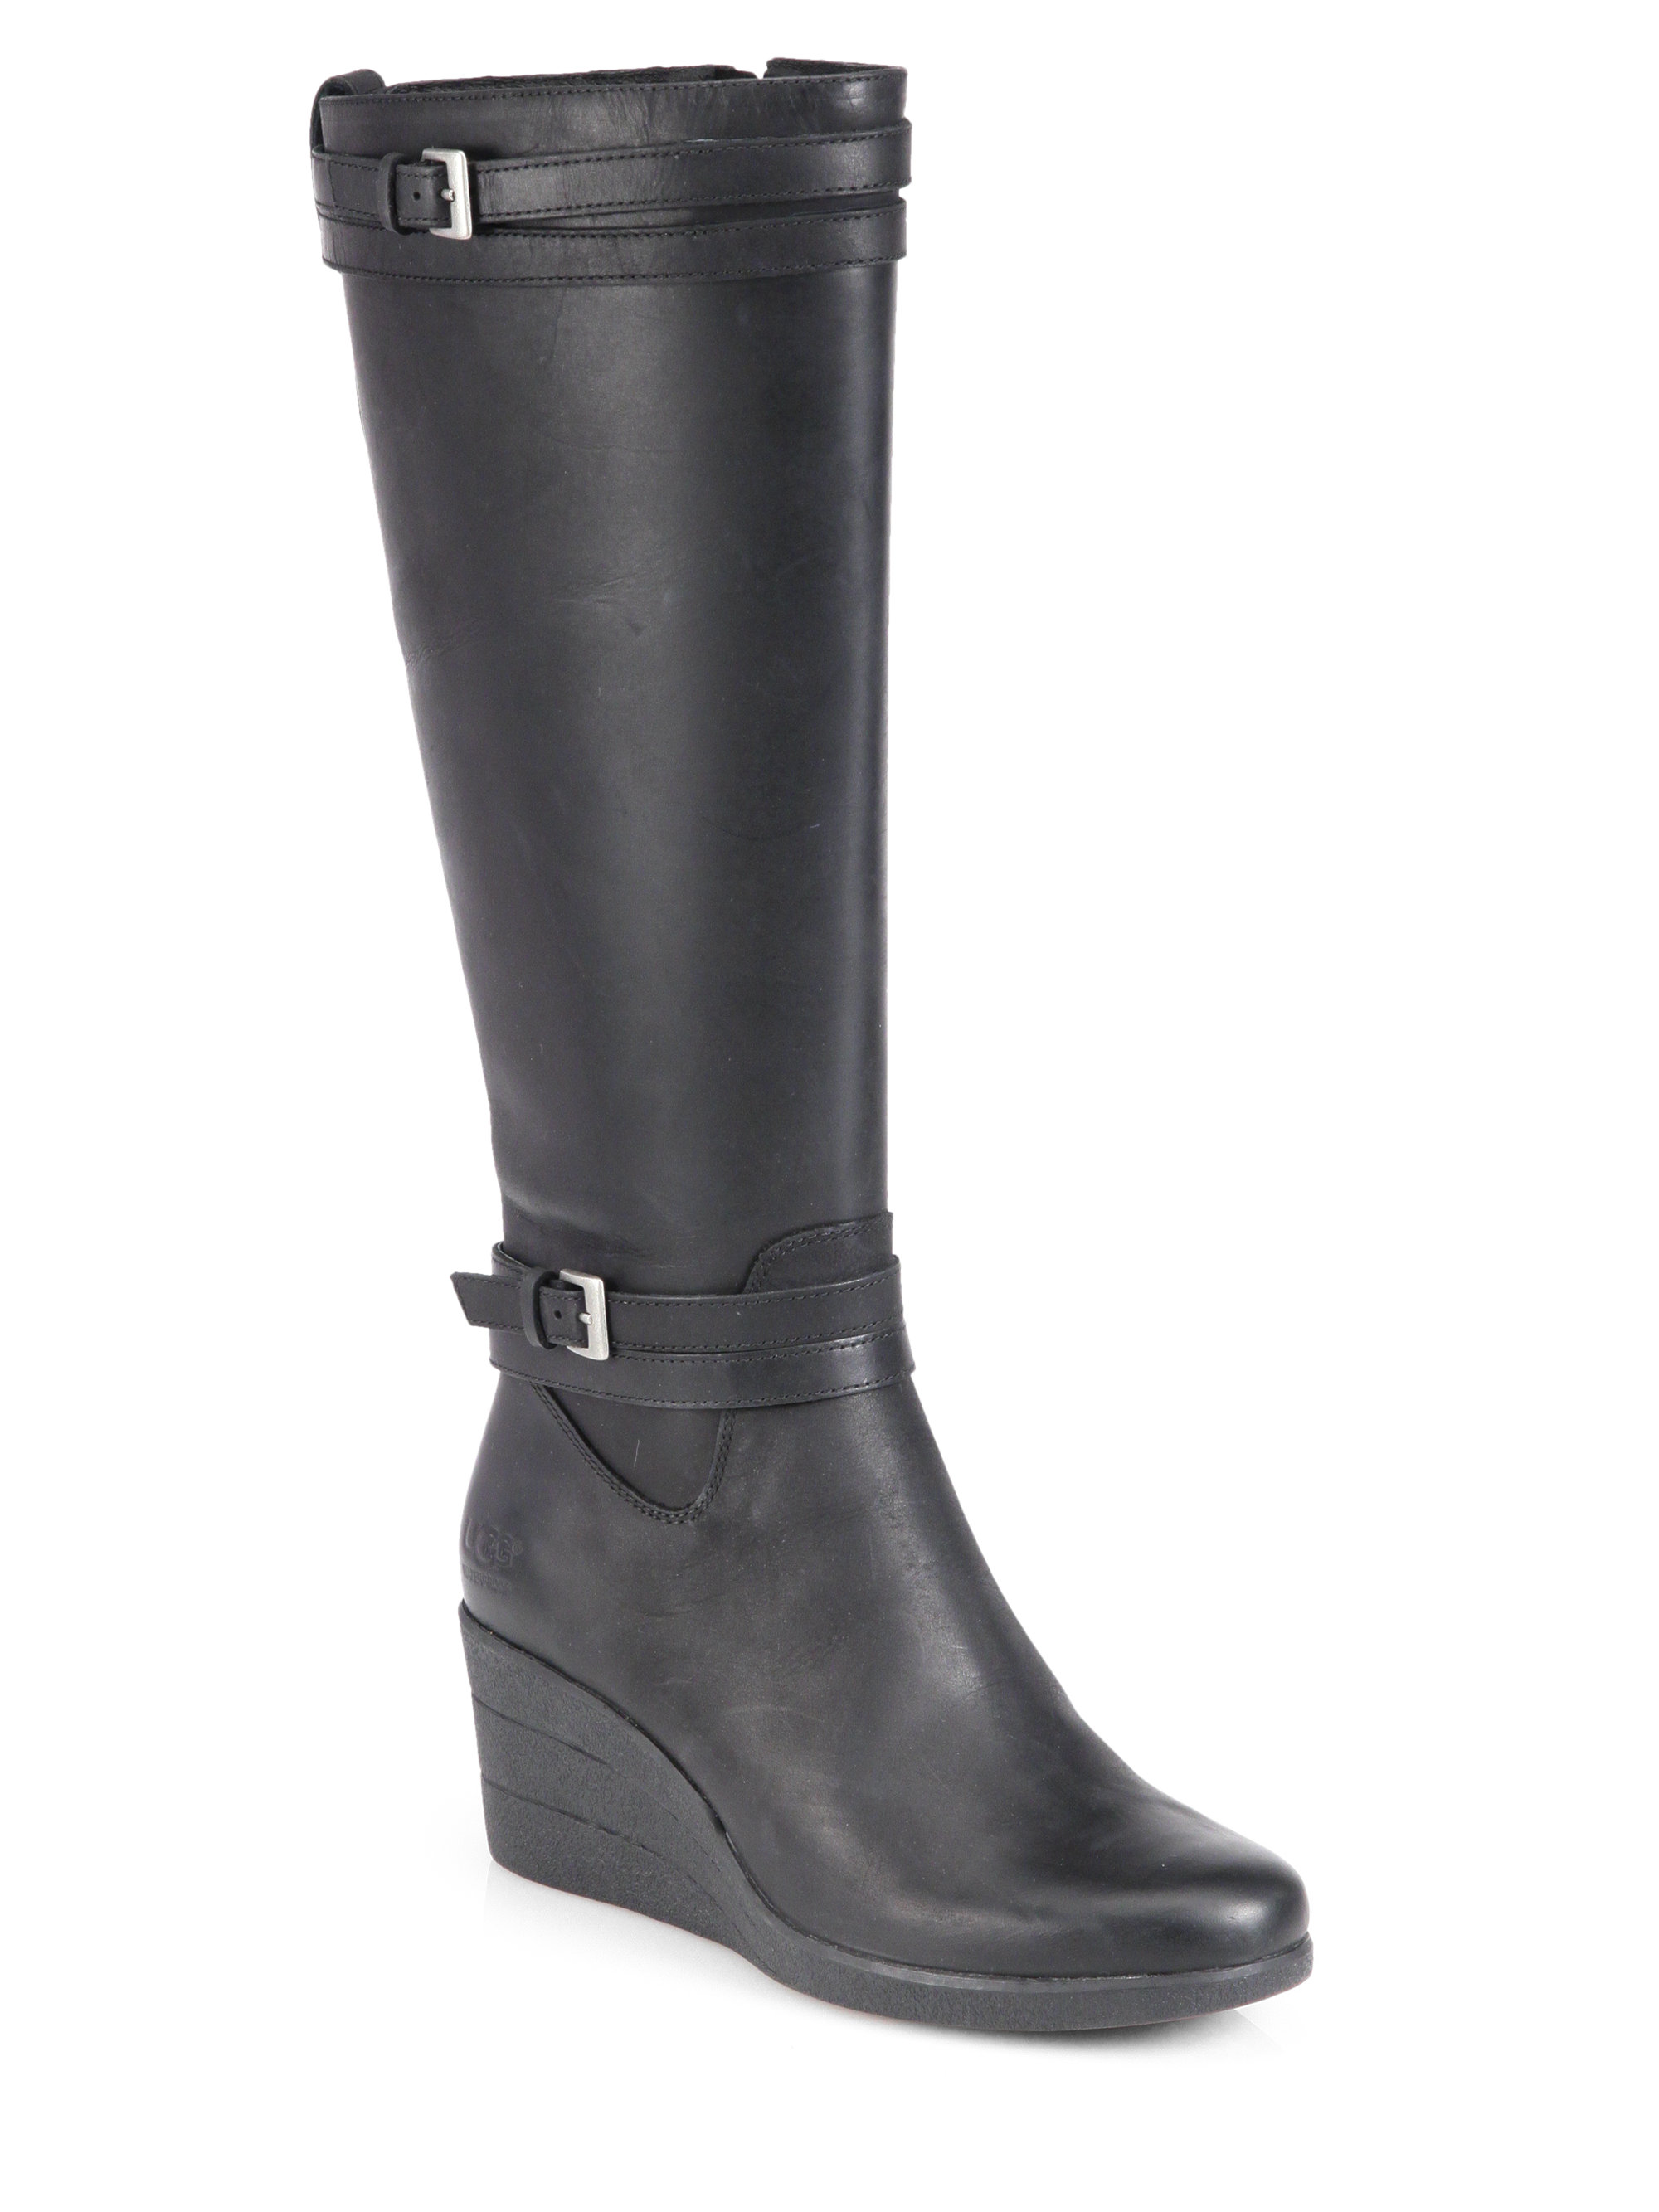 Lyst - Ugg Irmah Leather Wedge Boots in Black